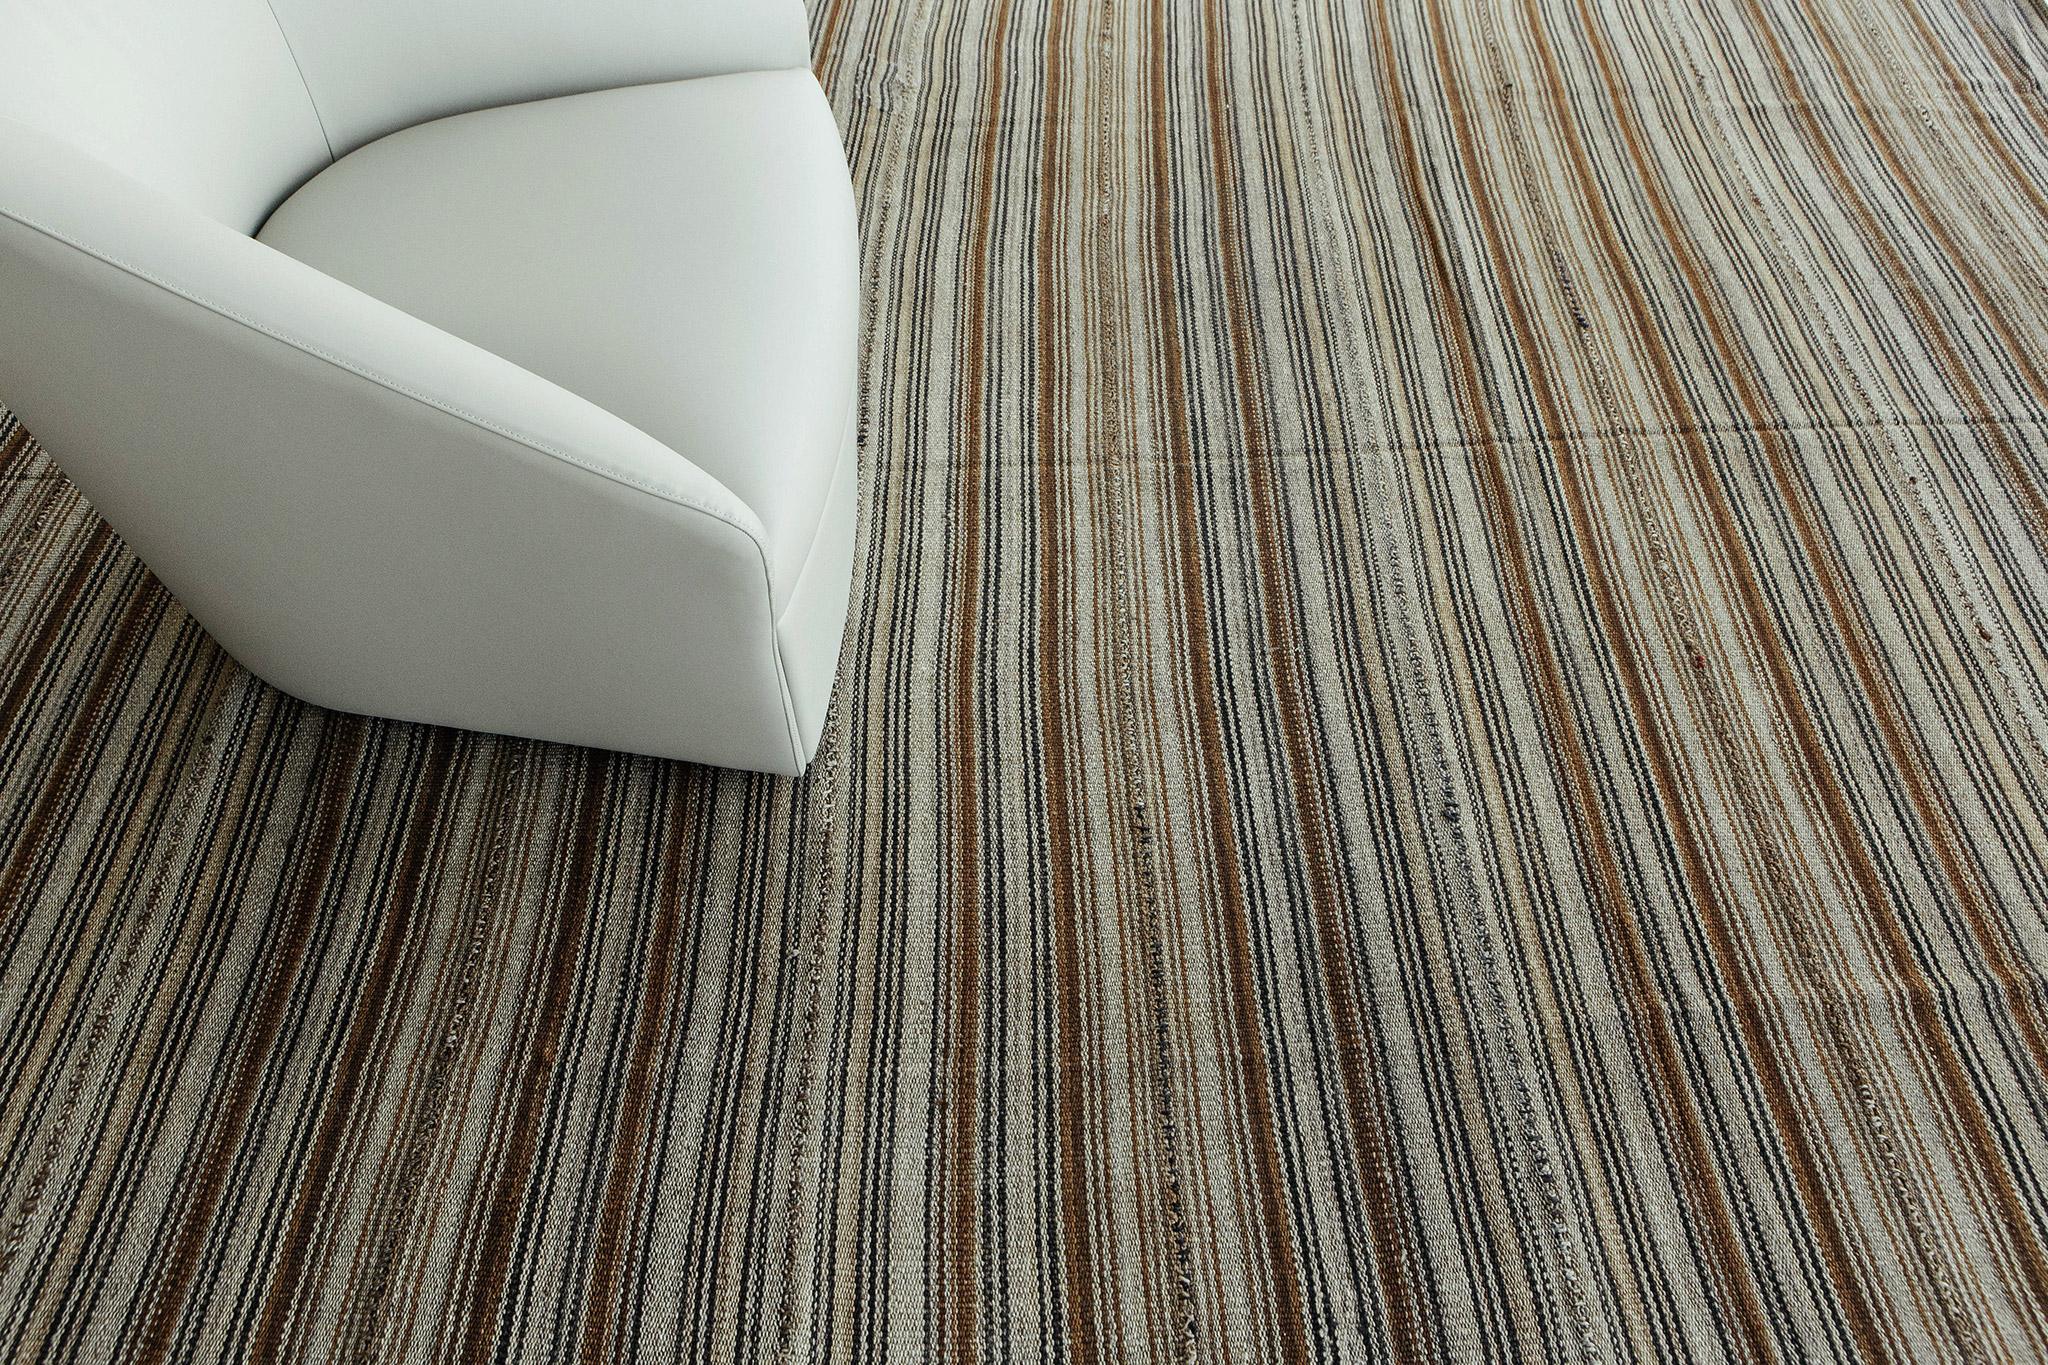 This rug features slightly varying degrees of stripes that also vary in their concentration and thickness. Its simple design allows it to easily fit into a variety of interiors.

Rug Number 26763
Size 9' 10